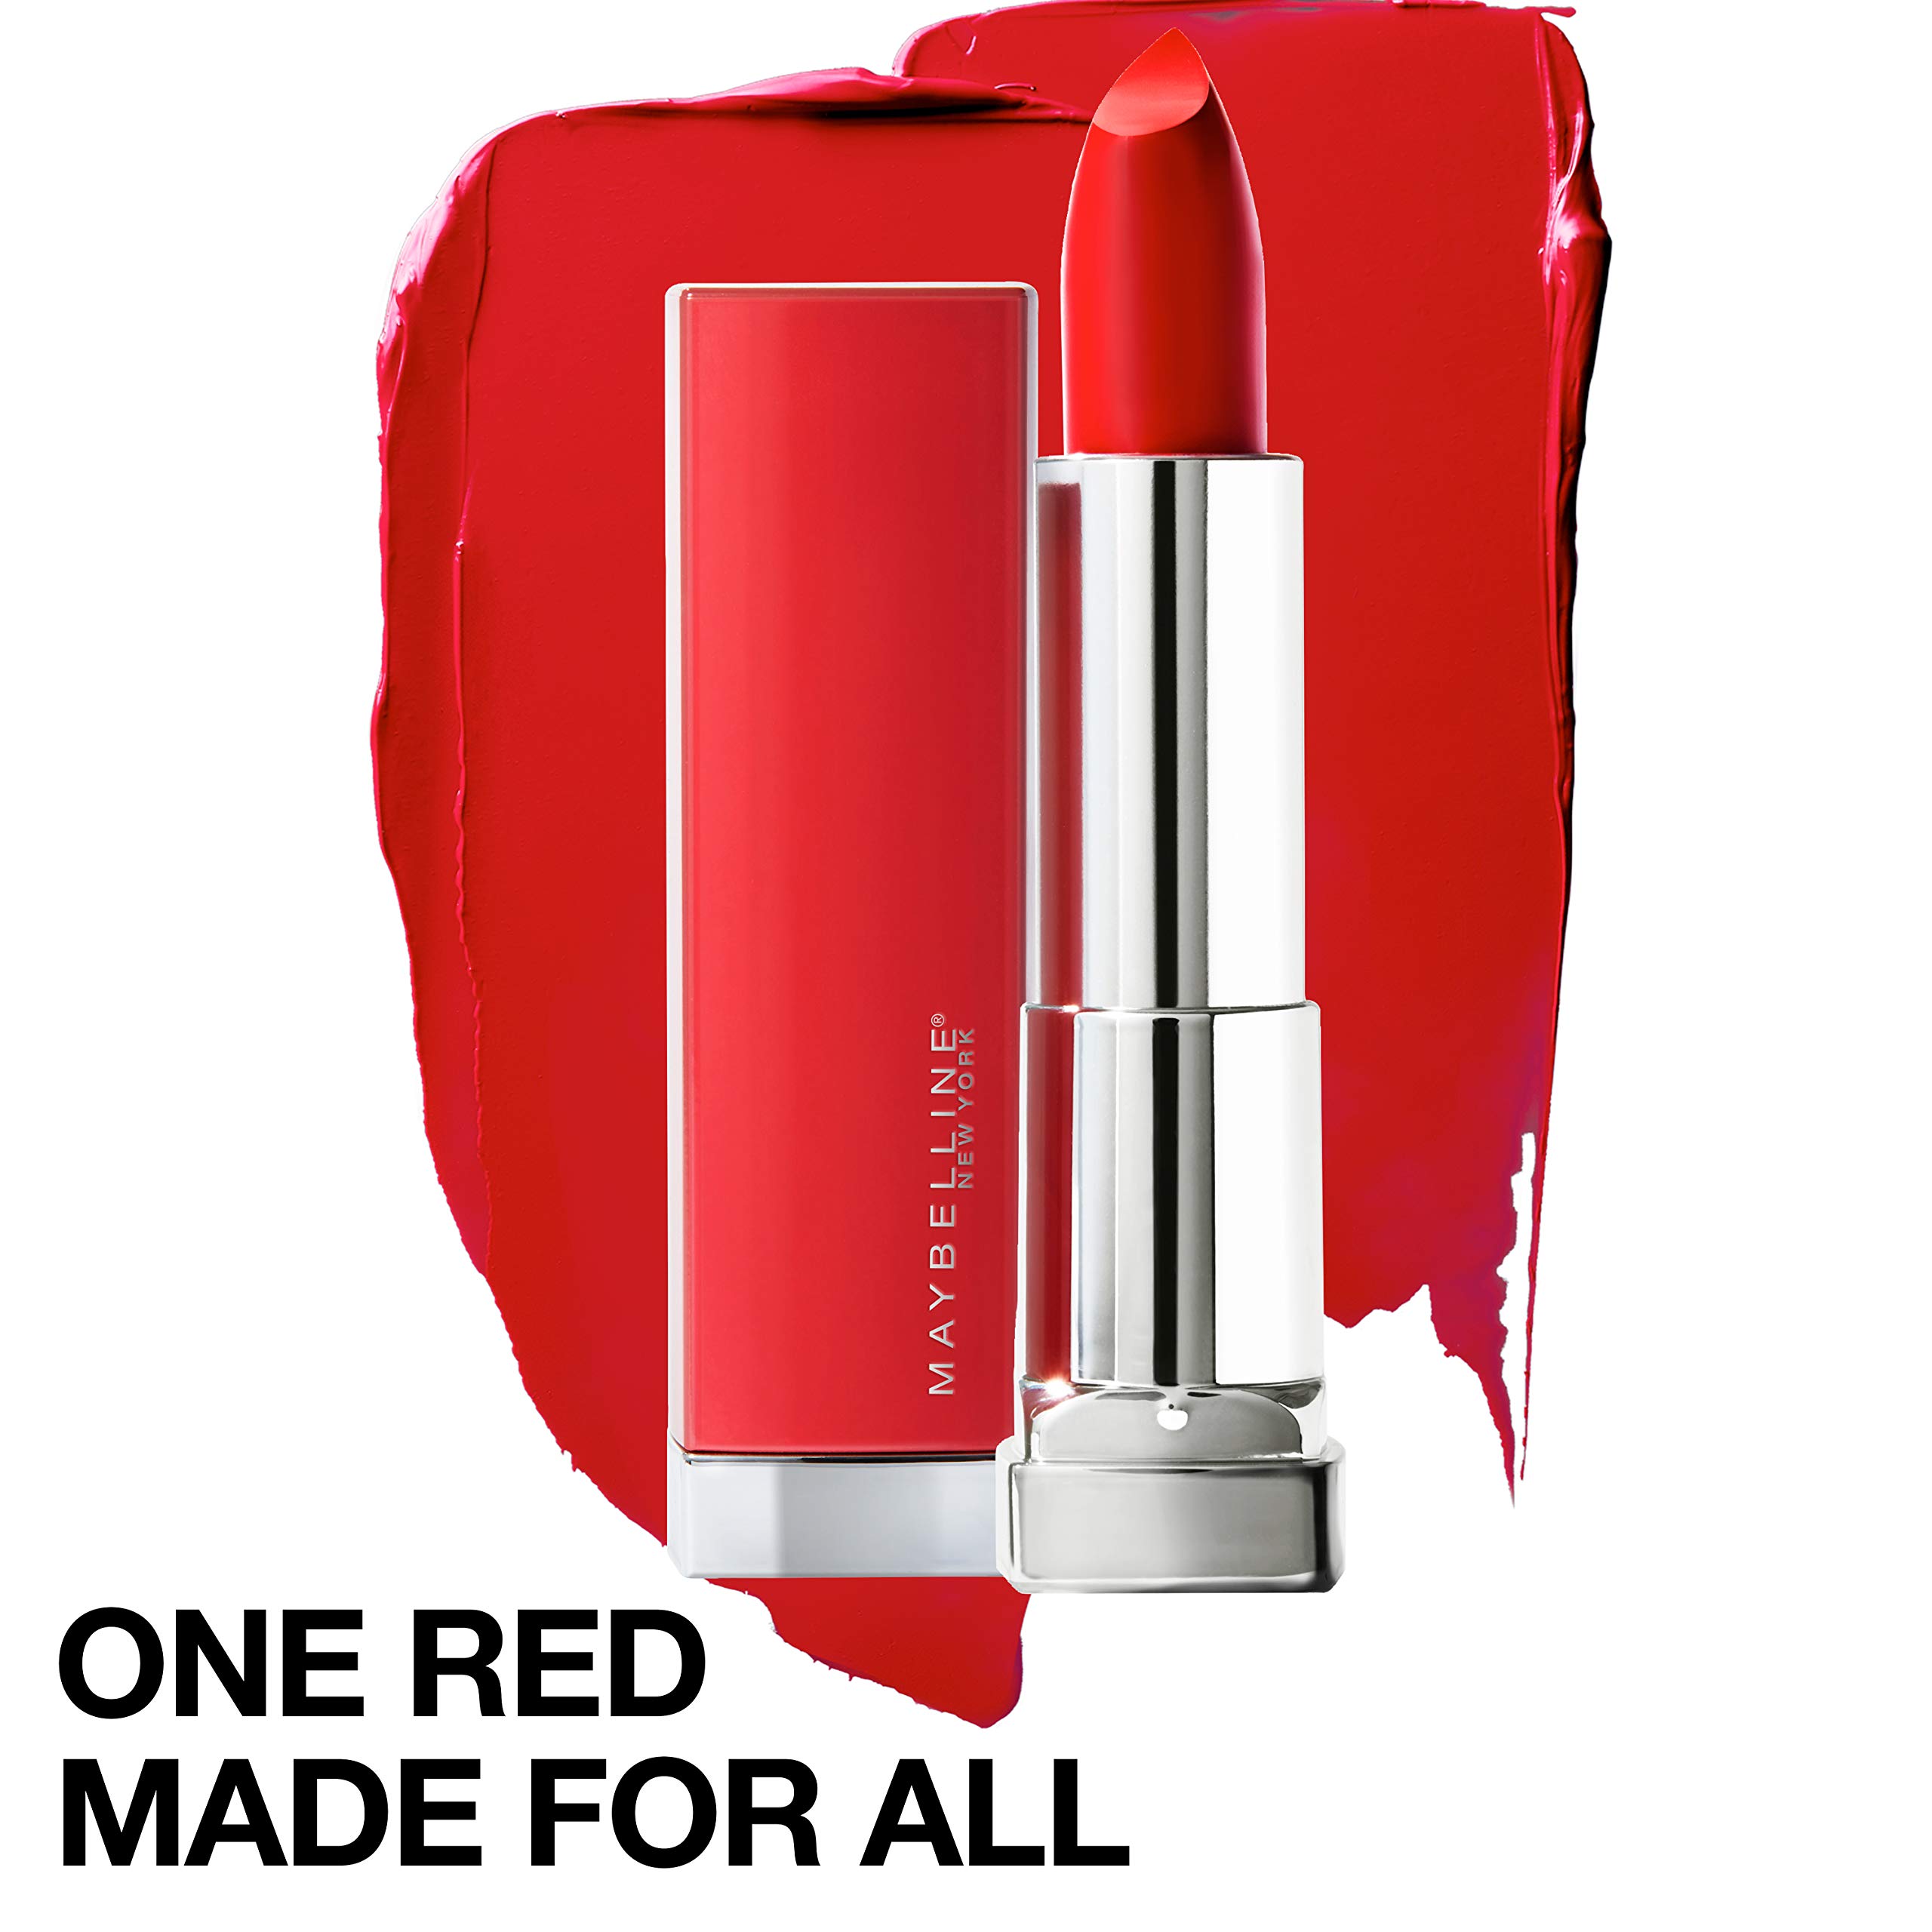 Maybelline New York Color Sensational Made for All Lipstick, Crisp Lip Color & Hydrating Formula, Red For Me, Red, 1 Count